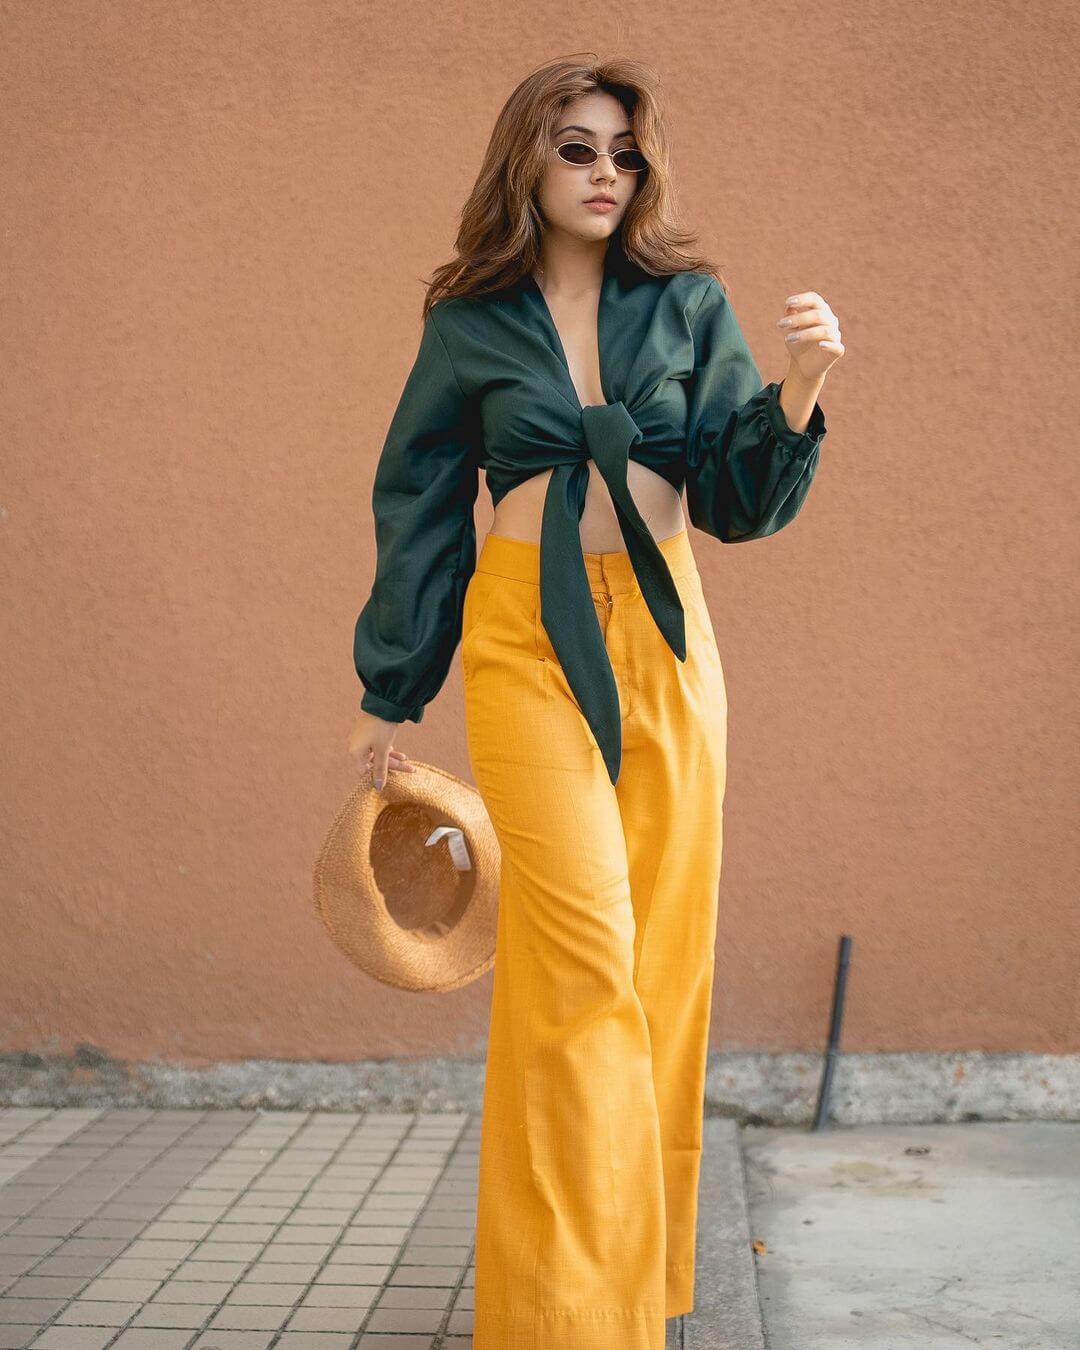 Reem Shaikh Let Go On Vacation Look In Green Tie On Top With Yellow Pants Styled With a Cool Hat & Shades